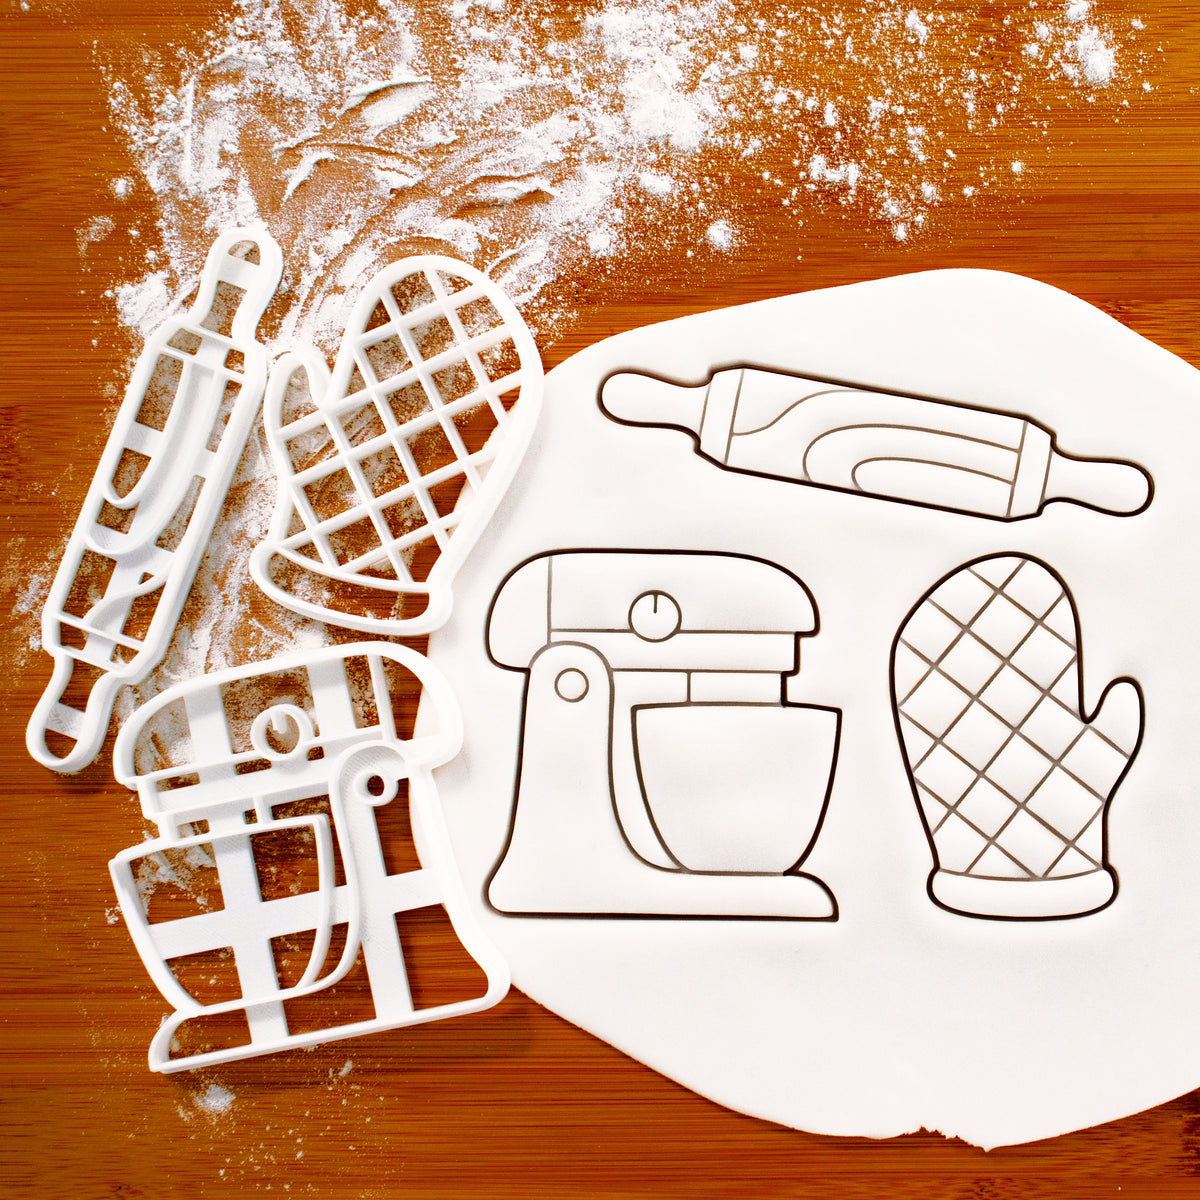 Set of 3 Baking themed Cookie Cutters: Rolling Pin, Oven Glove, & Stand Mixer